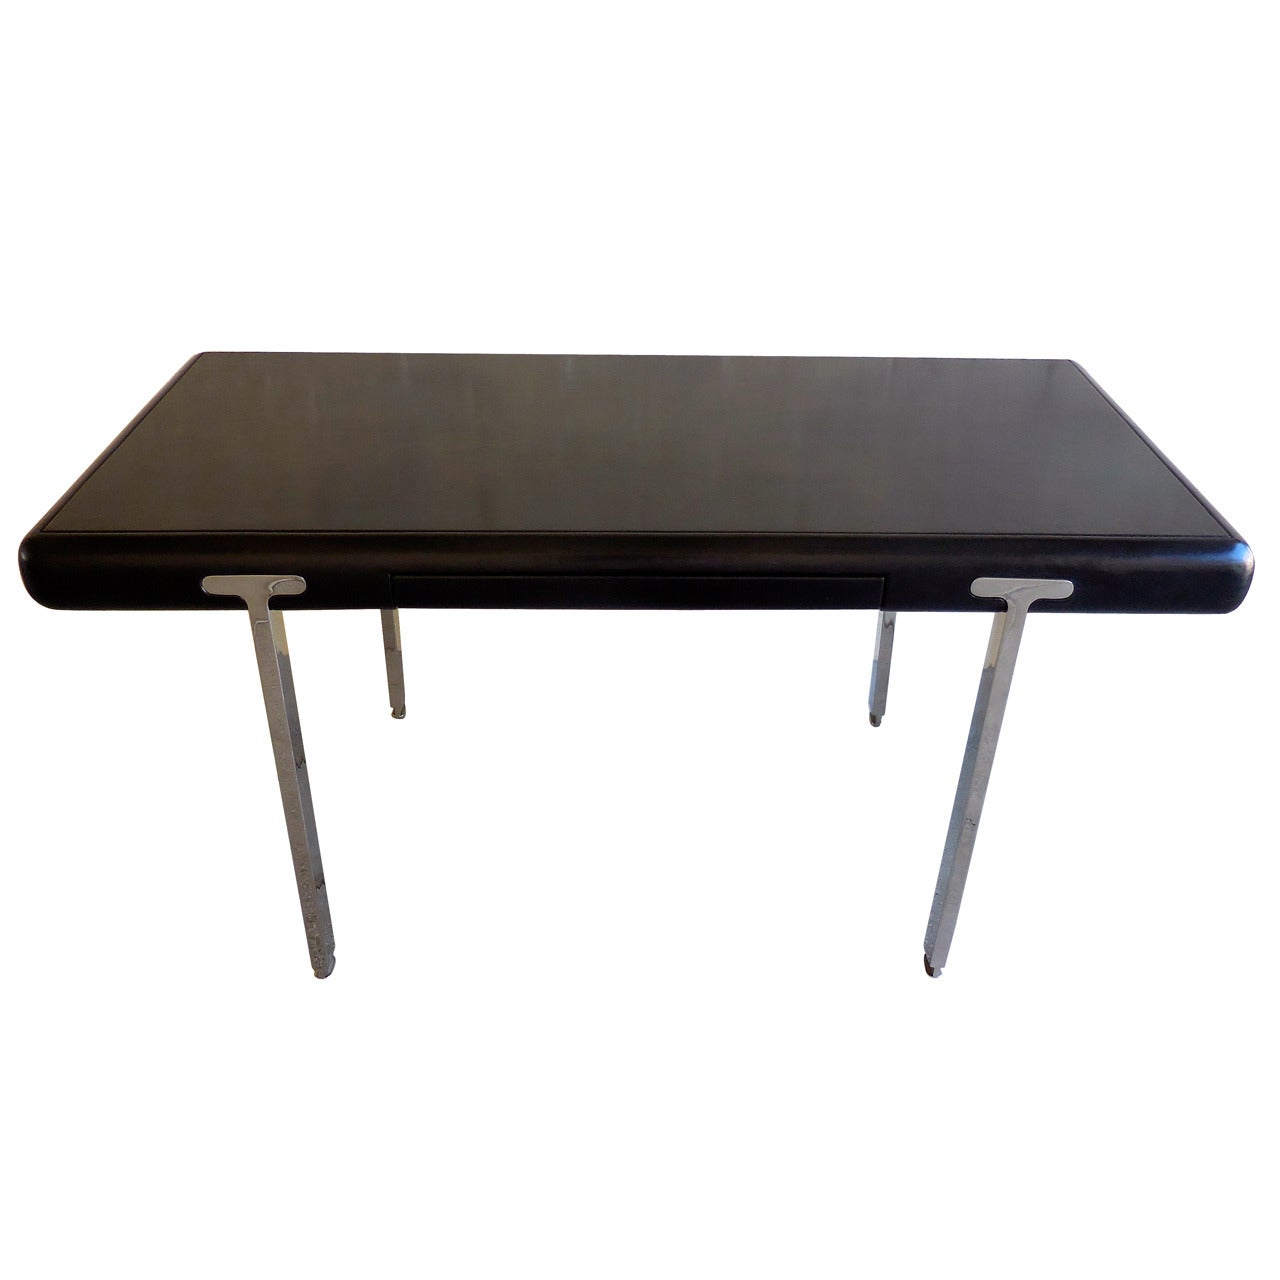 Handsome Black Leather Topped Chrome Leg Writing Table, circa 1970s